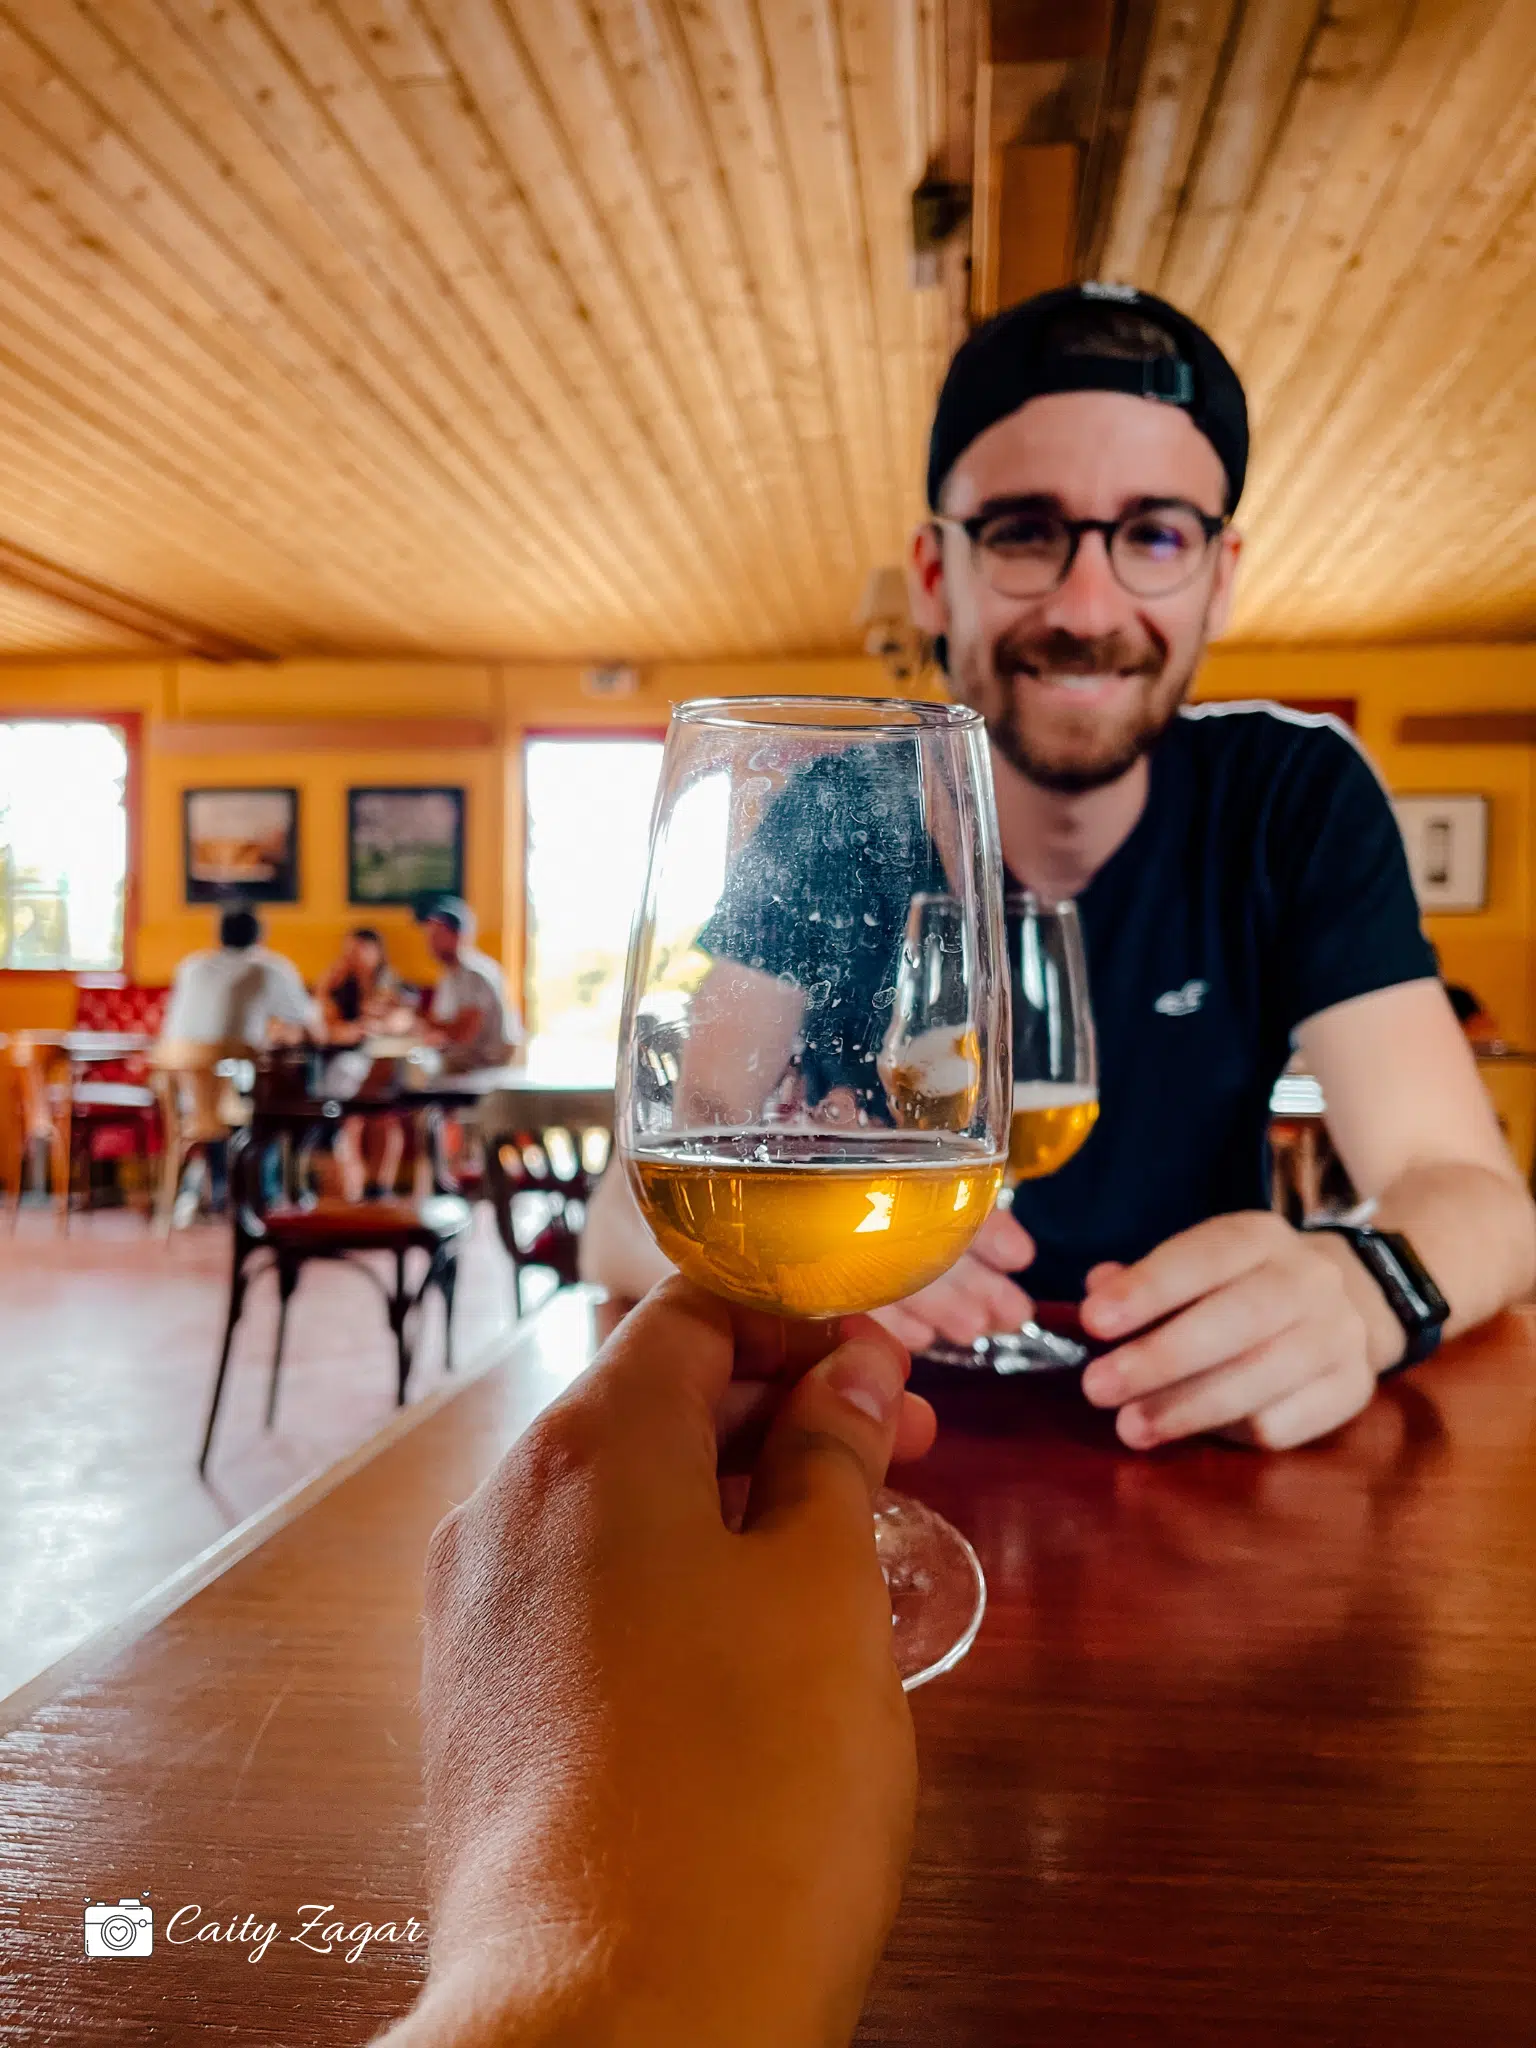 Someone holding up a glass of cider in a dining room during a cider tasting. 